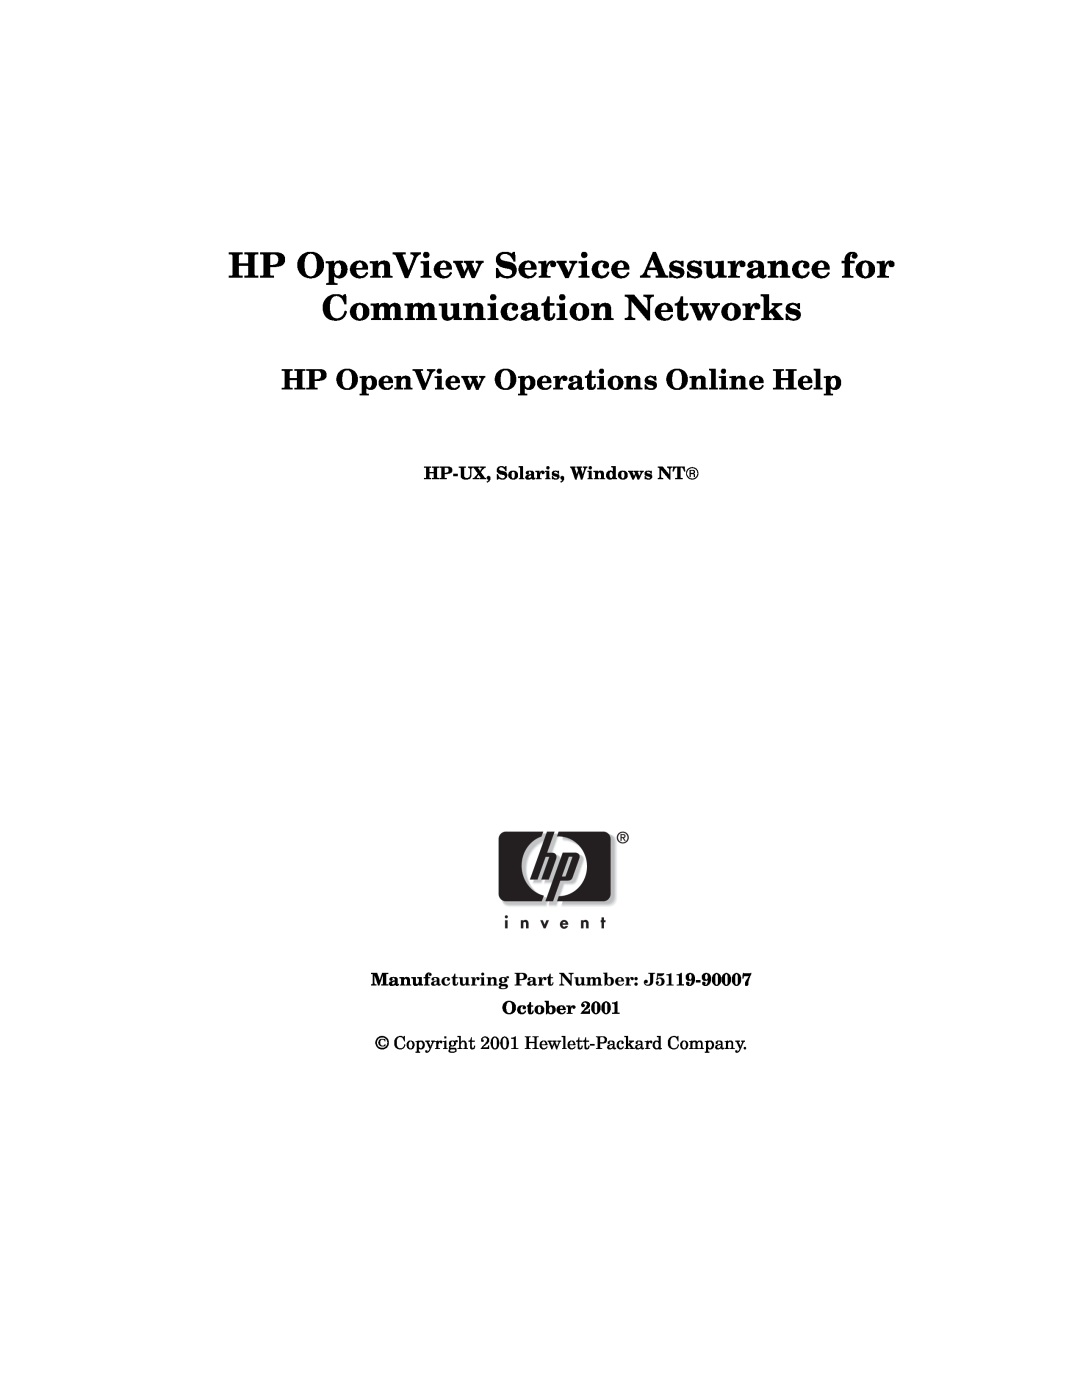 HP OPENVIEW J5119-90007 manual HP OpenView Service Assurance for Communication Networks, October 